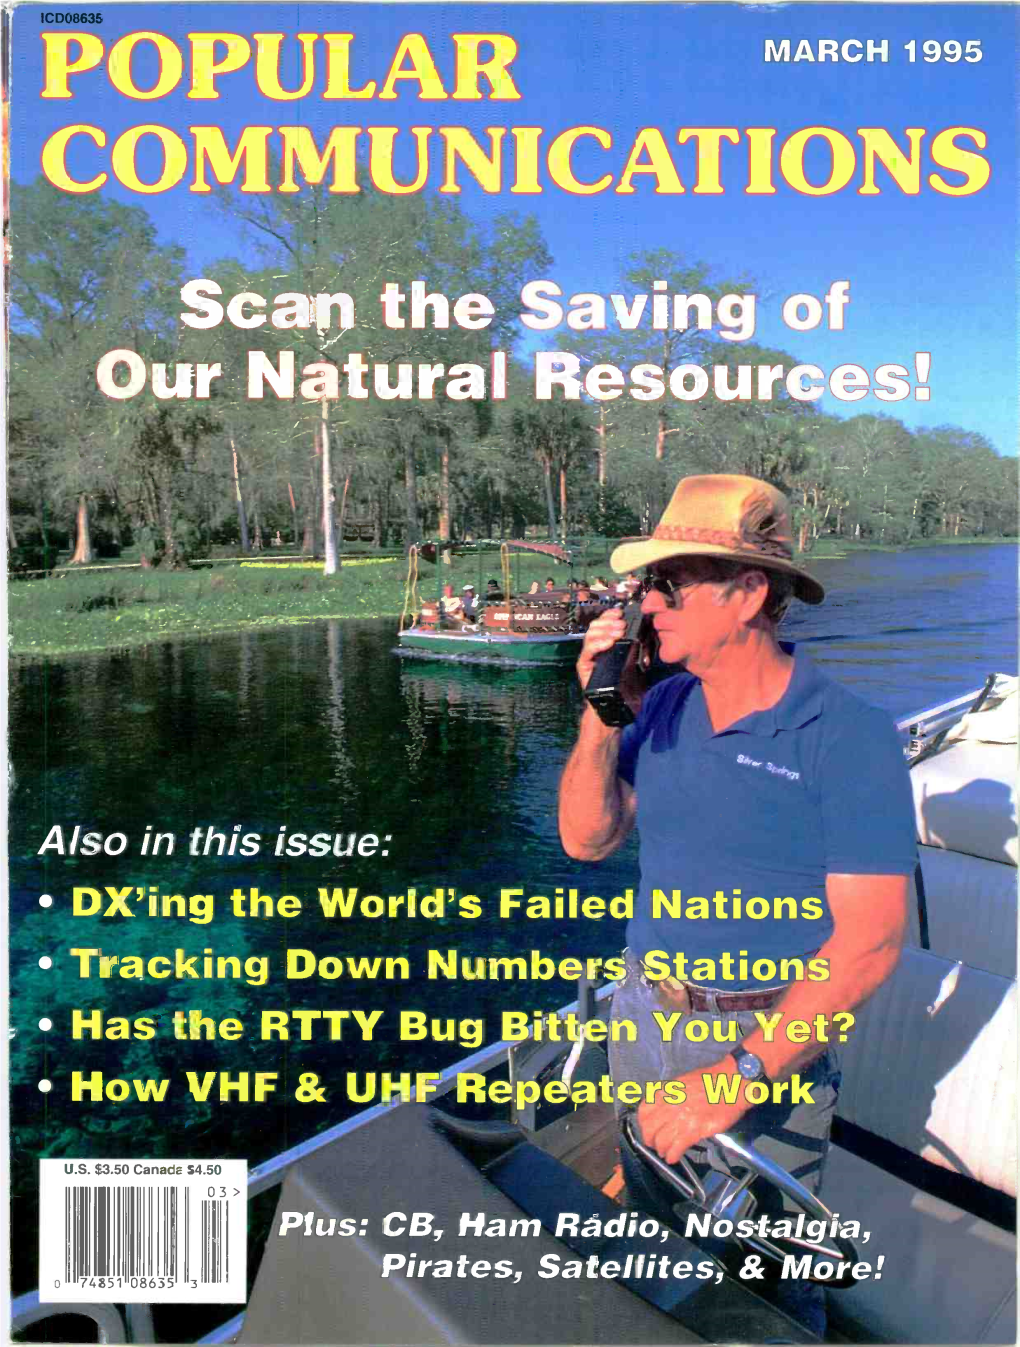 POPULARCOMMUNICATIONS MARCH 1995 Also DX'ing in This the Issue: World's Failed Nations Hastracking the RTTY Down Bug Numbers Bit Stations \ N You Yet? -- How VHF &U.S